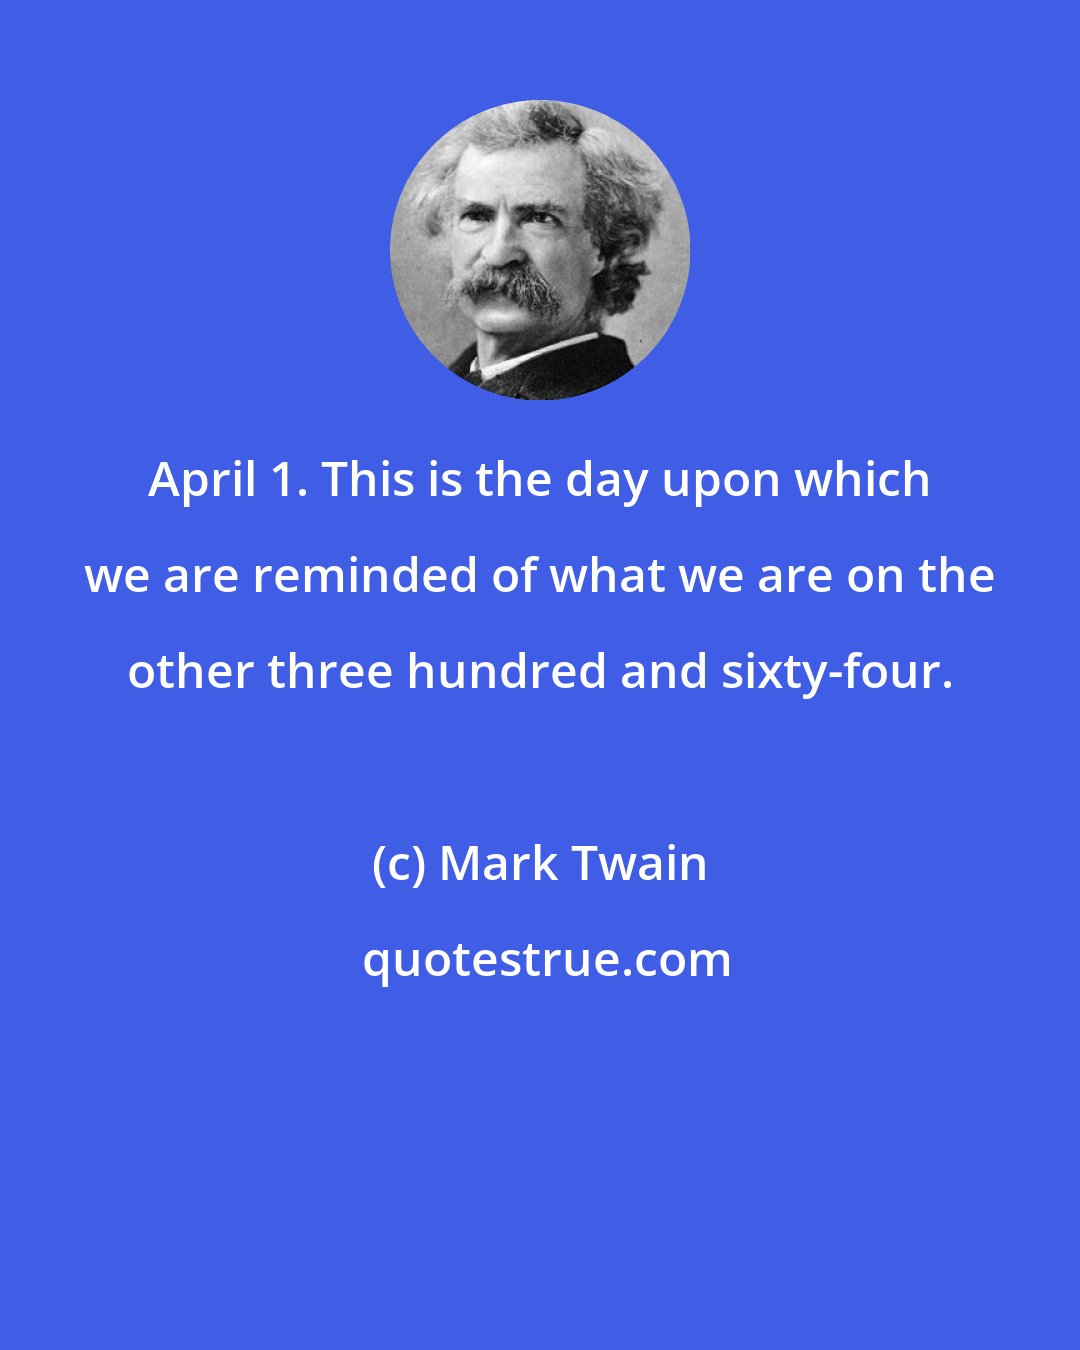 Mark Twain: April 1. This is the day upon which we are reminded of what we are on the other three hundred and sixty-four.